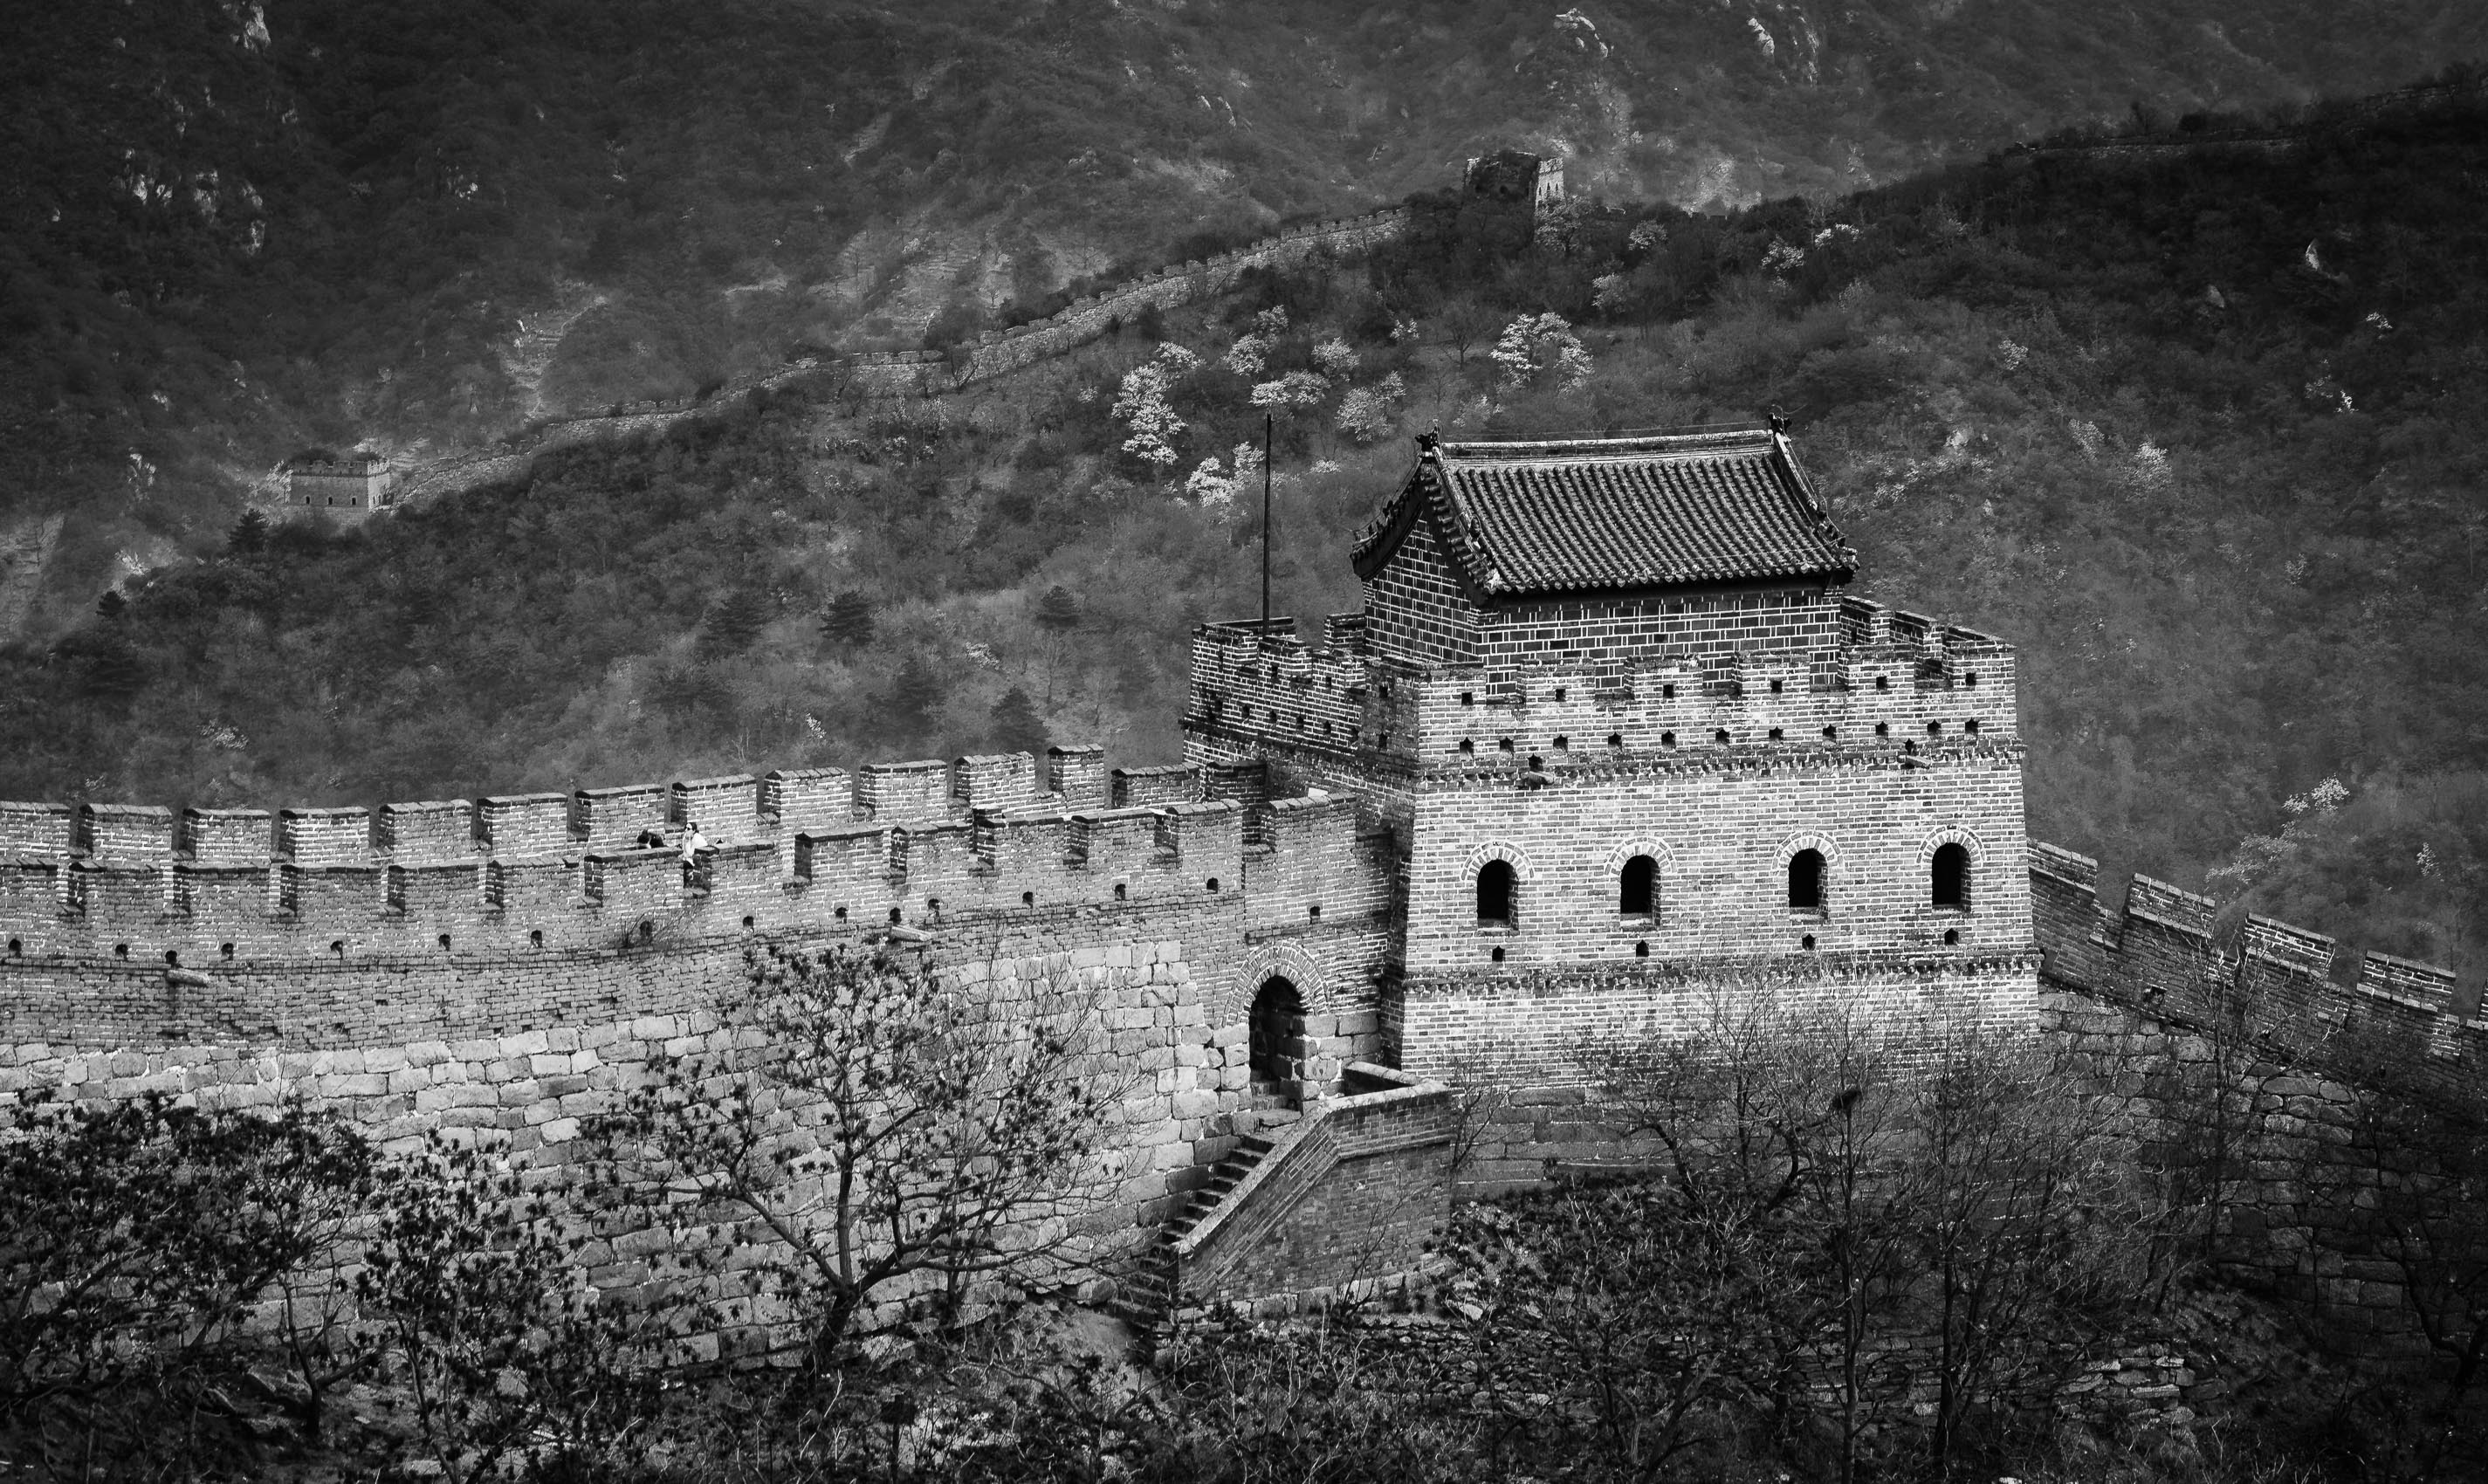 Fortress on the Great Wall of China at Mutianyu, near Beijing. ZM009